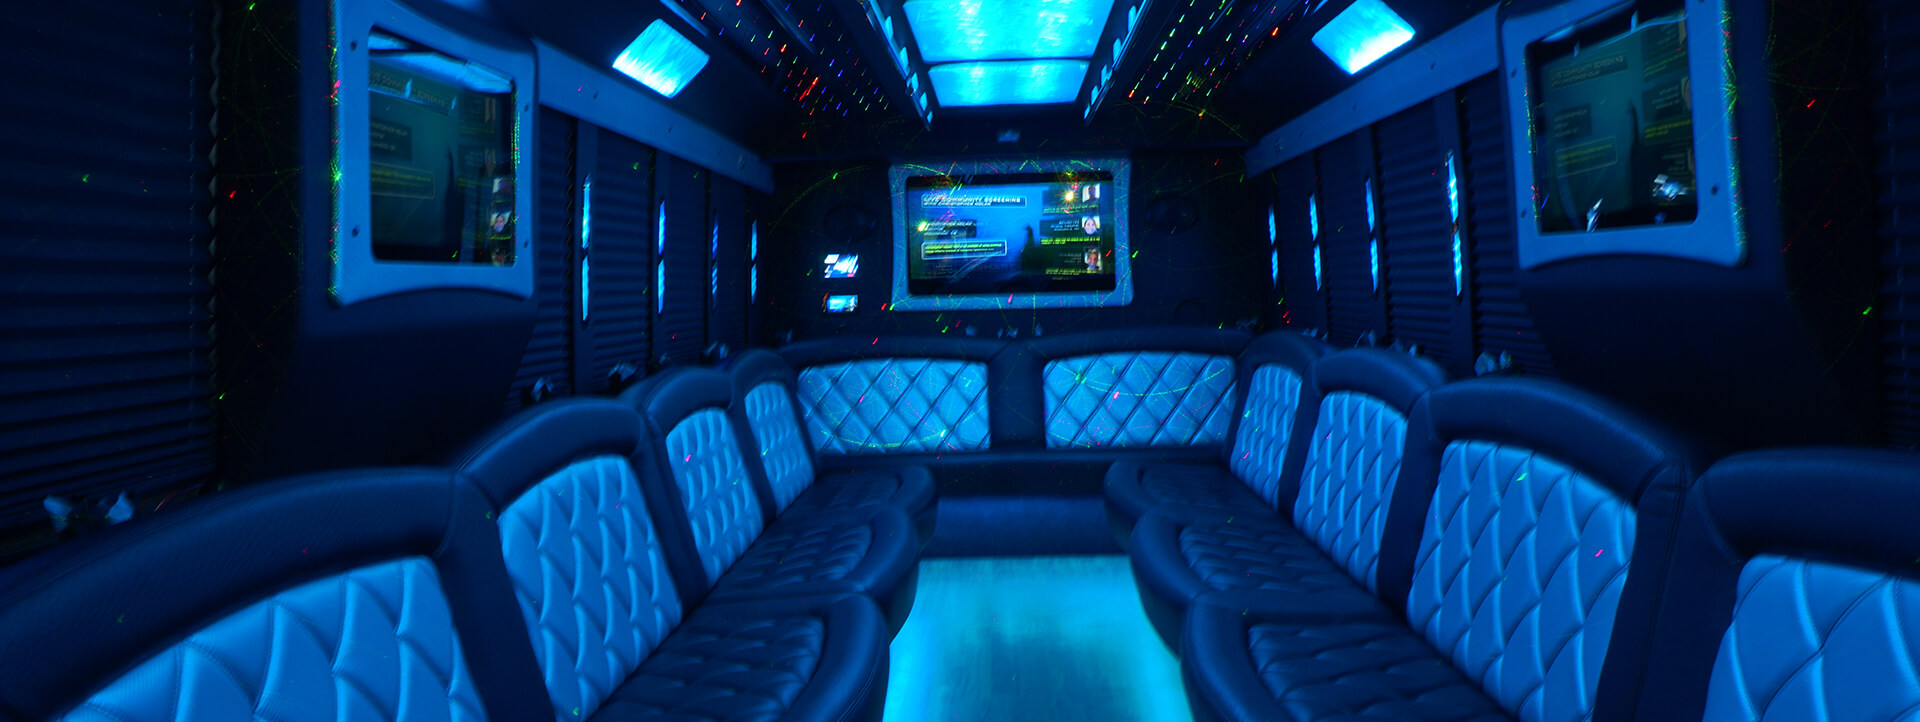 multiple TV screens inside a party bus rental